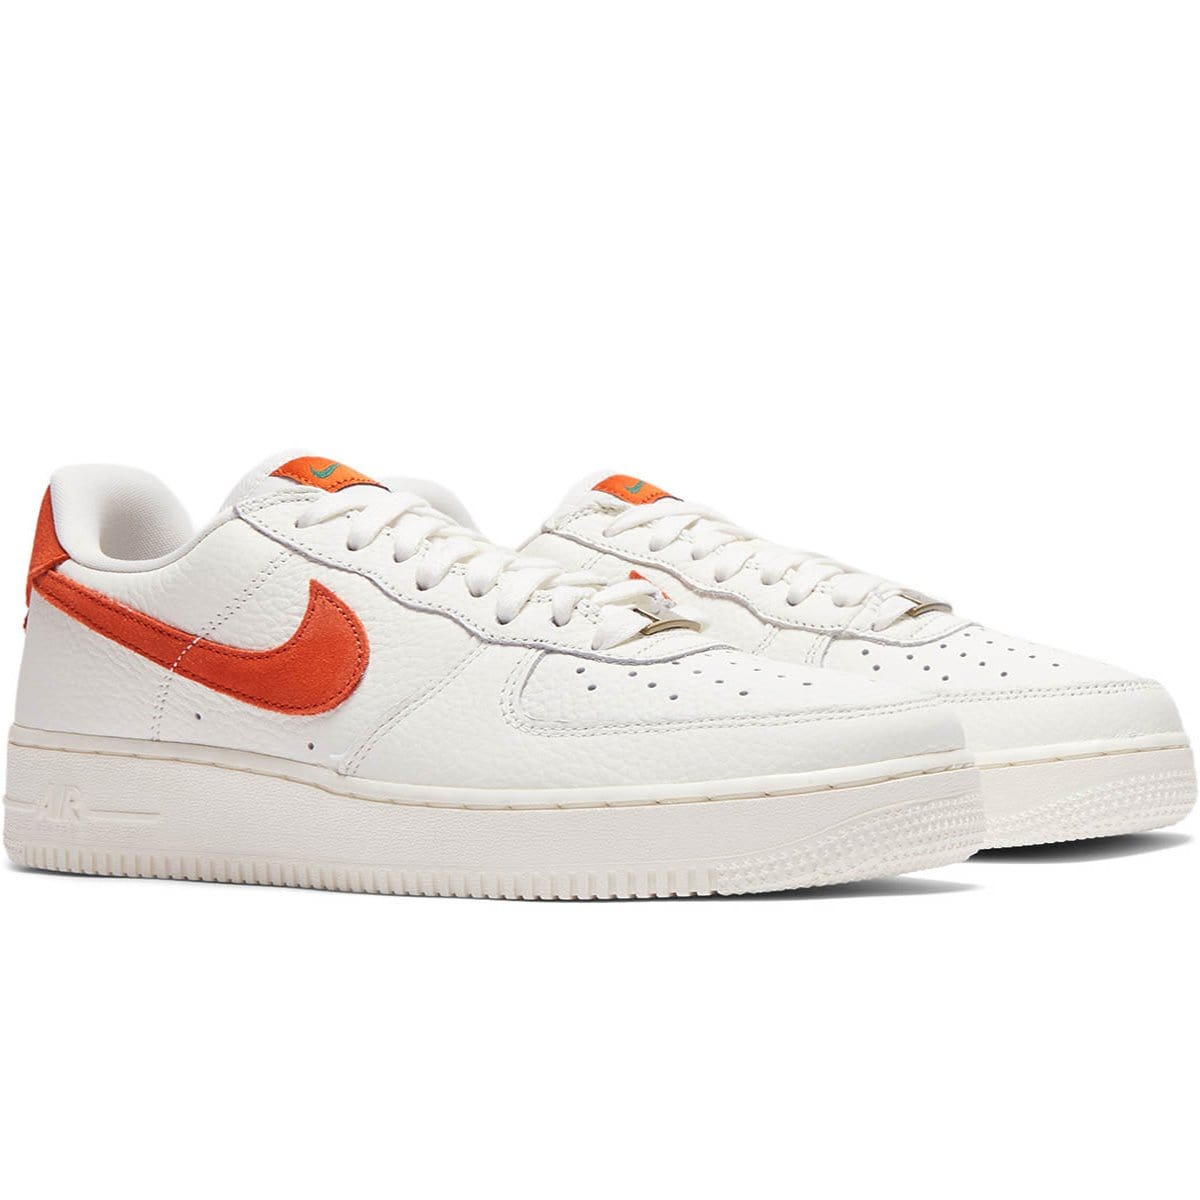 AIR FORCE 1 '07 CRAFT